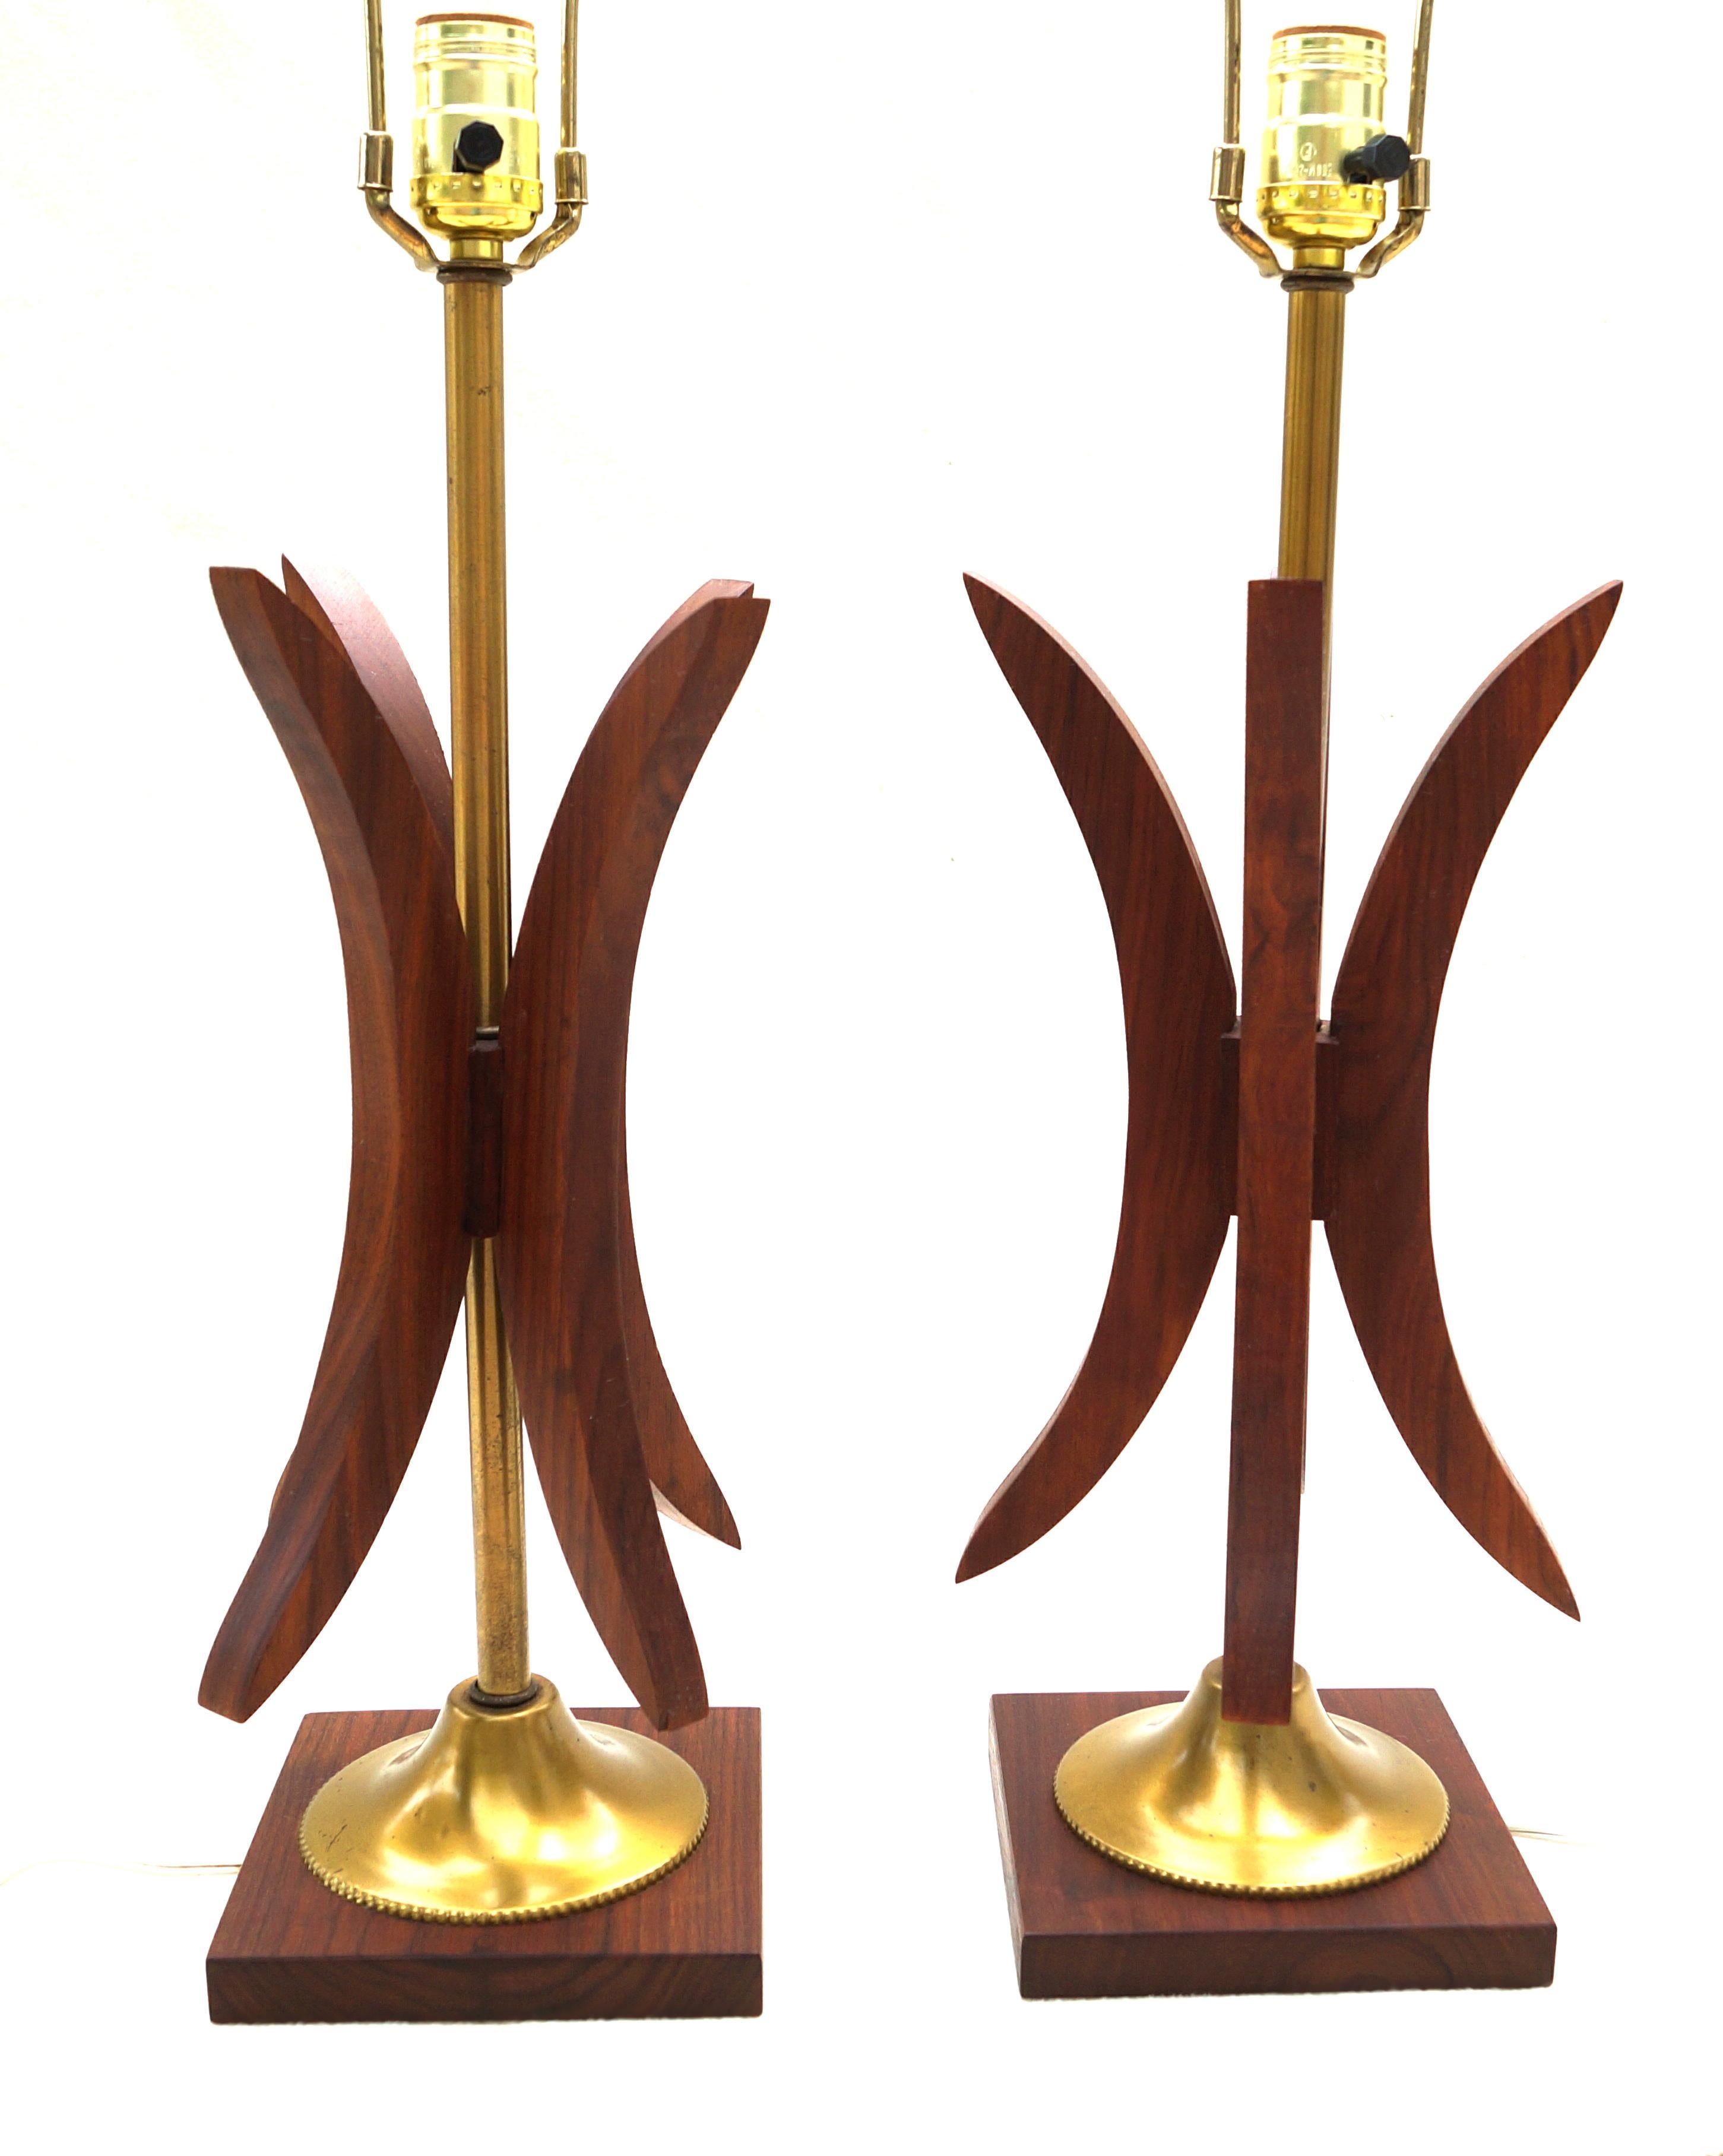 Wood Pair of Adrian Pearsall Attrib Sculptural Table Lamps Danish Mid-Century Modern For Sale